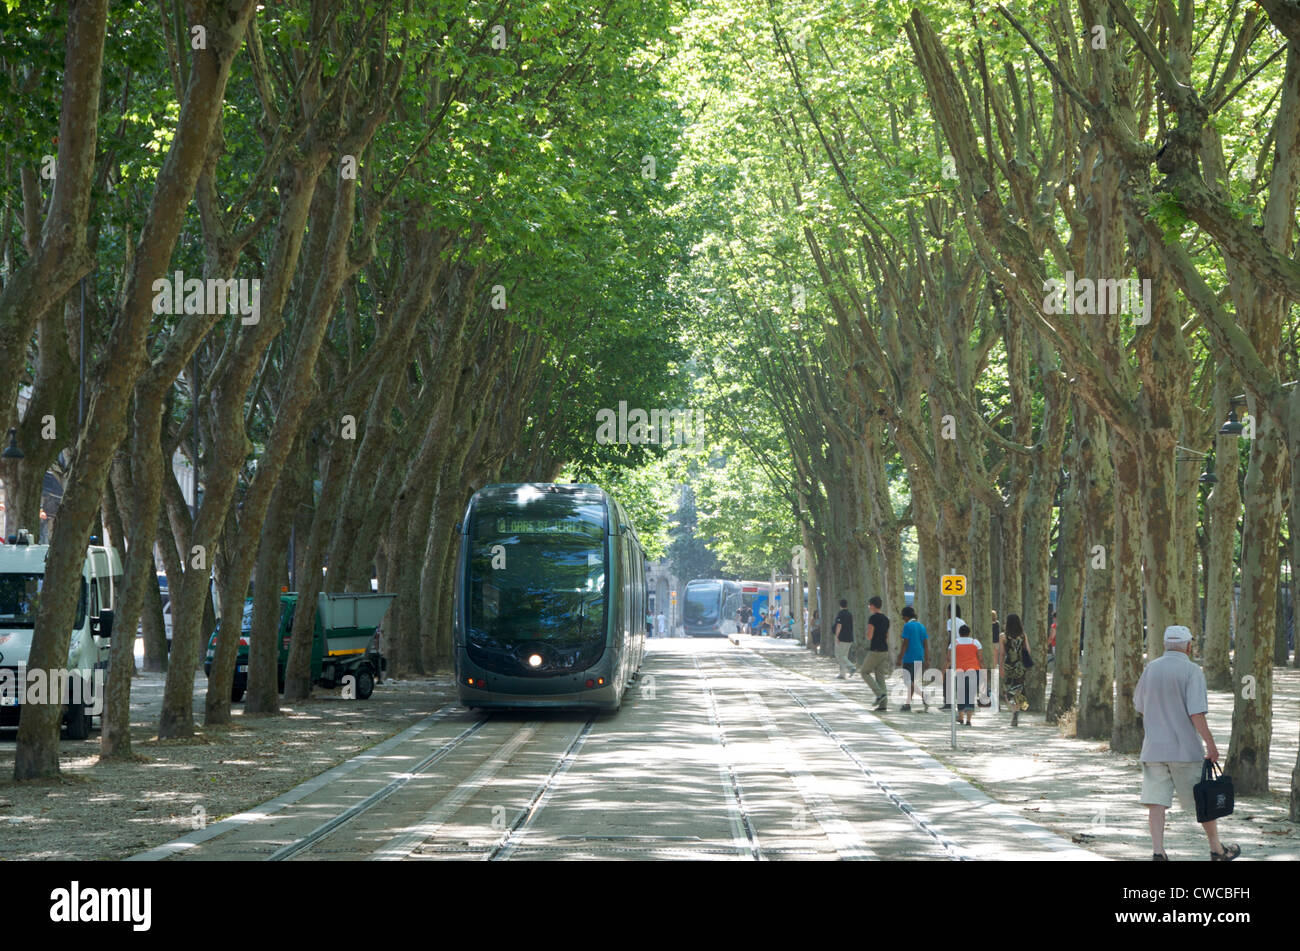 Public transport tram system in old Bordeaux, France, Europe Stock Photo